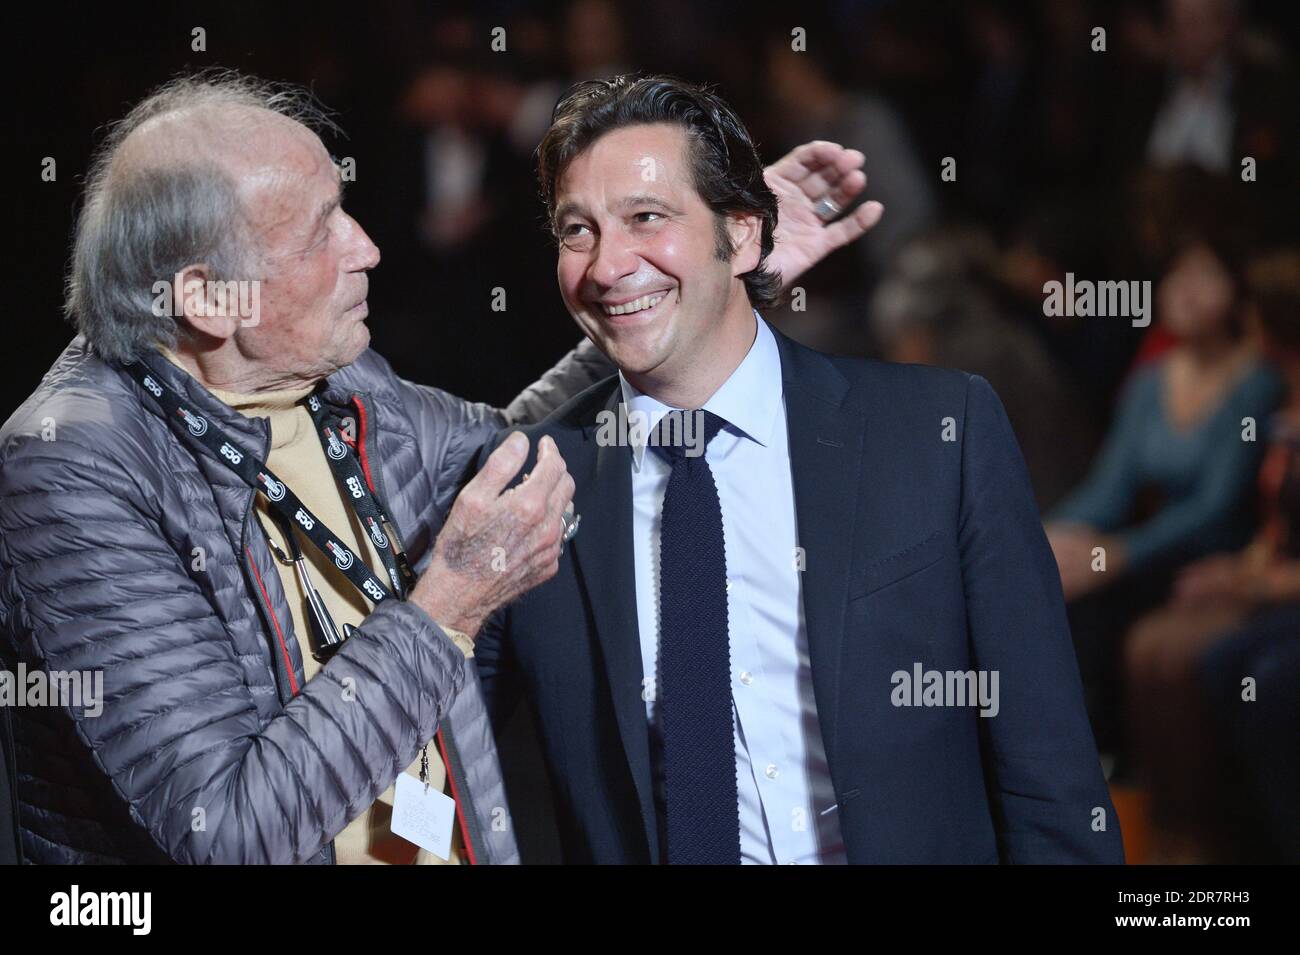 Actor Venantino Venantini and comedian Laurent Gerra at the Opening Ceremony of the 7th Lumiere Festival in Lyon, France on October 12, 2015. Photo Julien Reynaud/APS-Medias/ABACAPRESS.COM Stock Photo